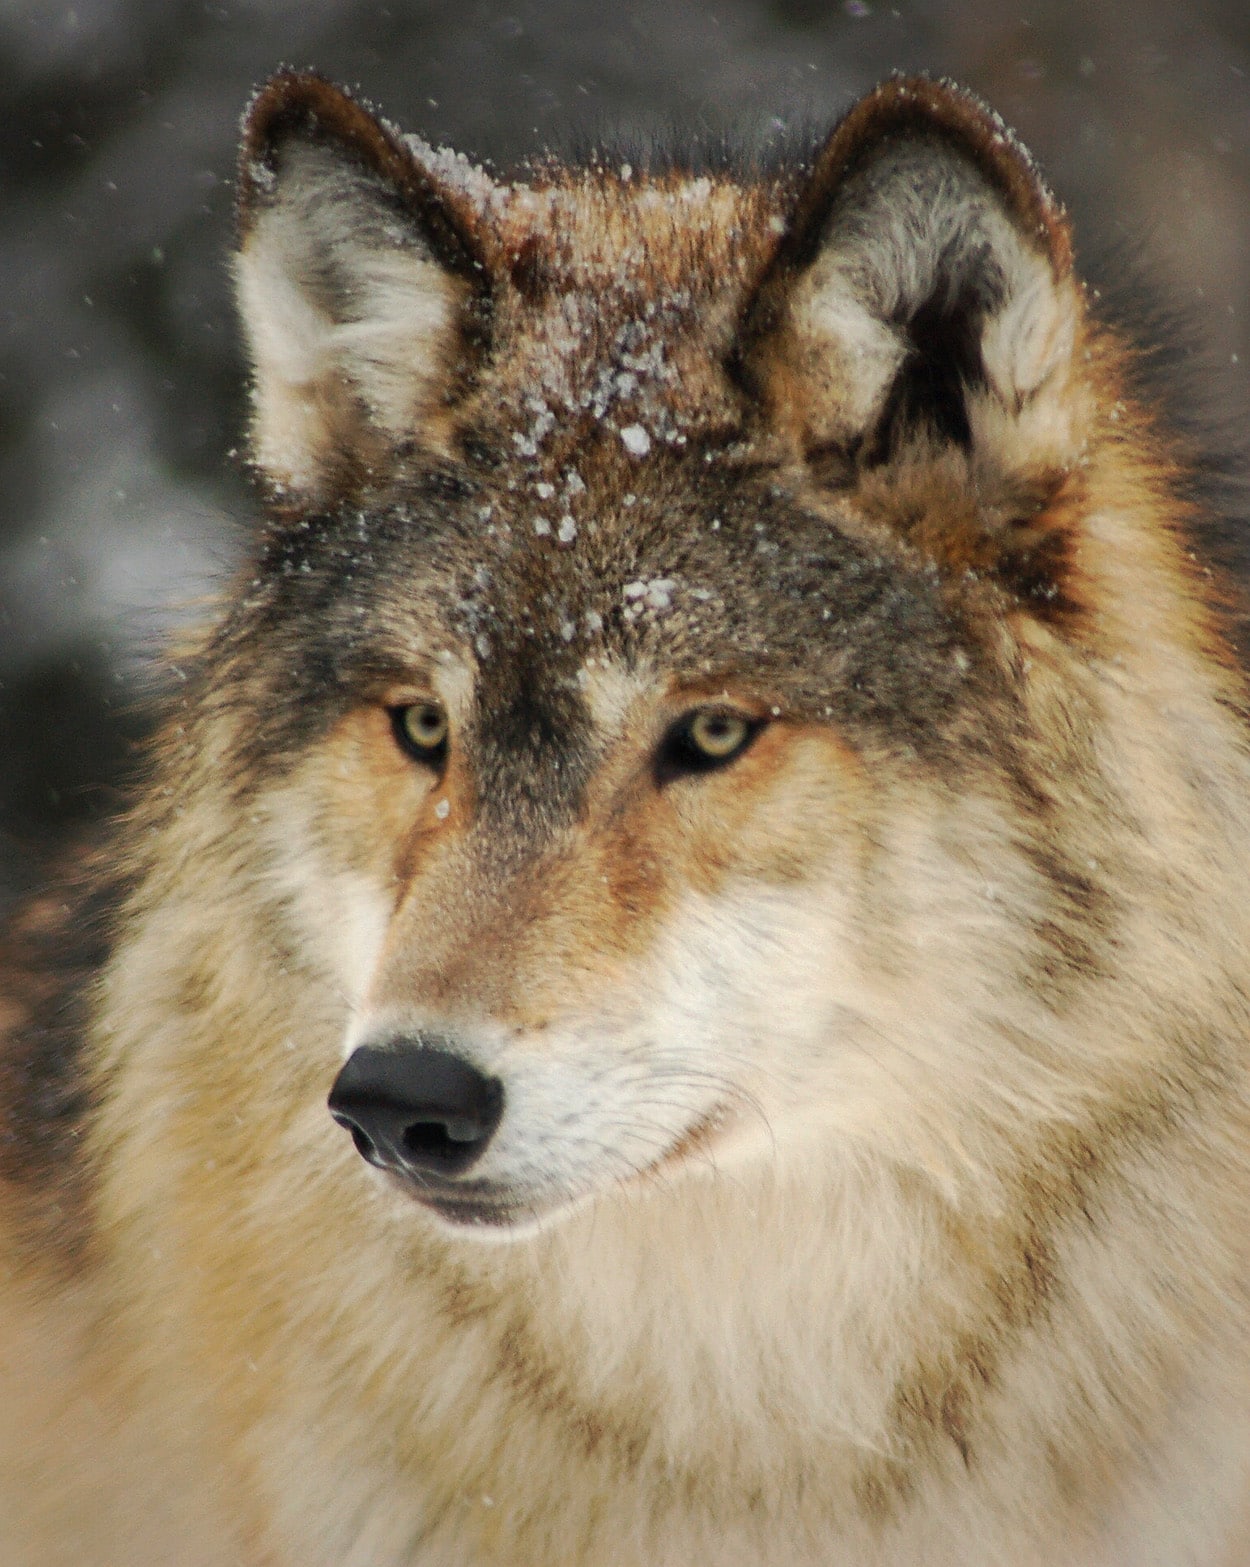 How wolves use hearing to engage with their world